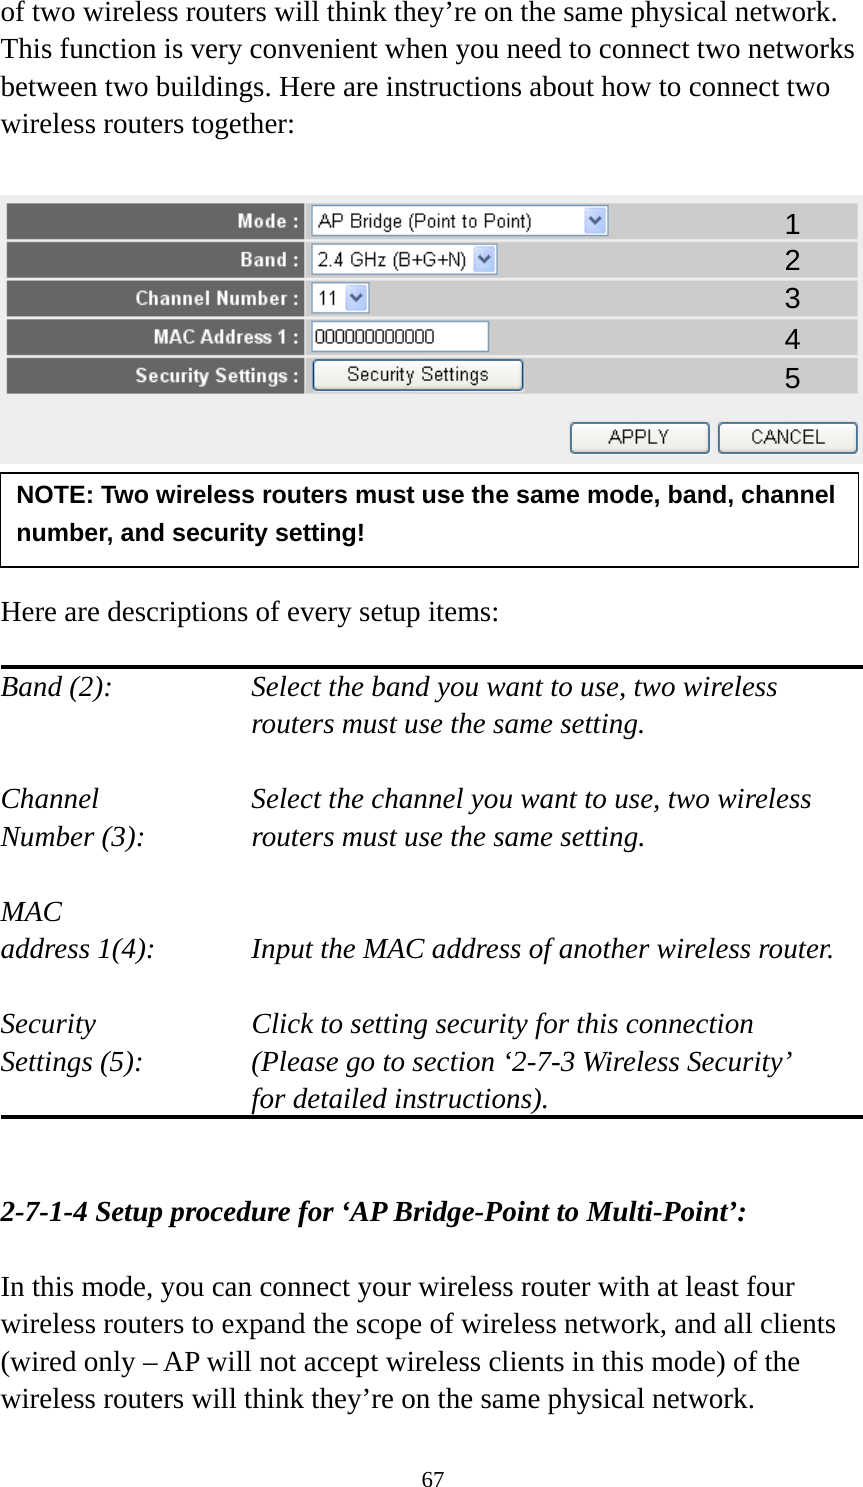 67 of two wireless routers will think they’re on the same physical network. This function is very convenient when you need to connect two networks between two buildings. Here are instructions about how to connect two wireless routers together:      Here are descriptions of every setup items:  Band (2):  Select the band you want to use, two wireless routers must use the same setting.  Channel  Select the channel you want to use, two wireless Number (3):  routers must use the same setting.  MAC address 1(4):  Input the MAC address of another wireless router.  Security    Click to setting security for this connection Settings (5):  (Please go to section ‘2-7-3 Wireless Security’   for detailed instructions).   2-7-1-4 Setup procedure for ‘AP Bridge-Point to Multi-Point’:  In this mode, you can connect your wireless router with at least four wireless routers to expand the scope of wireless network, and all clients (wired only – AP will not accept wireless clients in this mode) of the wireless routers will think they’re on the same physical network. NOTE: Two wireless routers must use the same mode, band, channel number, and security setting! 1 2 3 4 5 